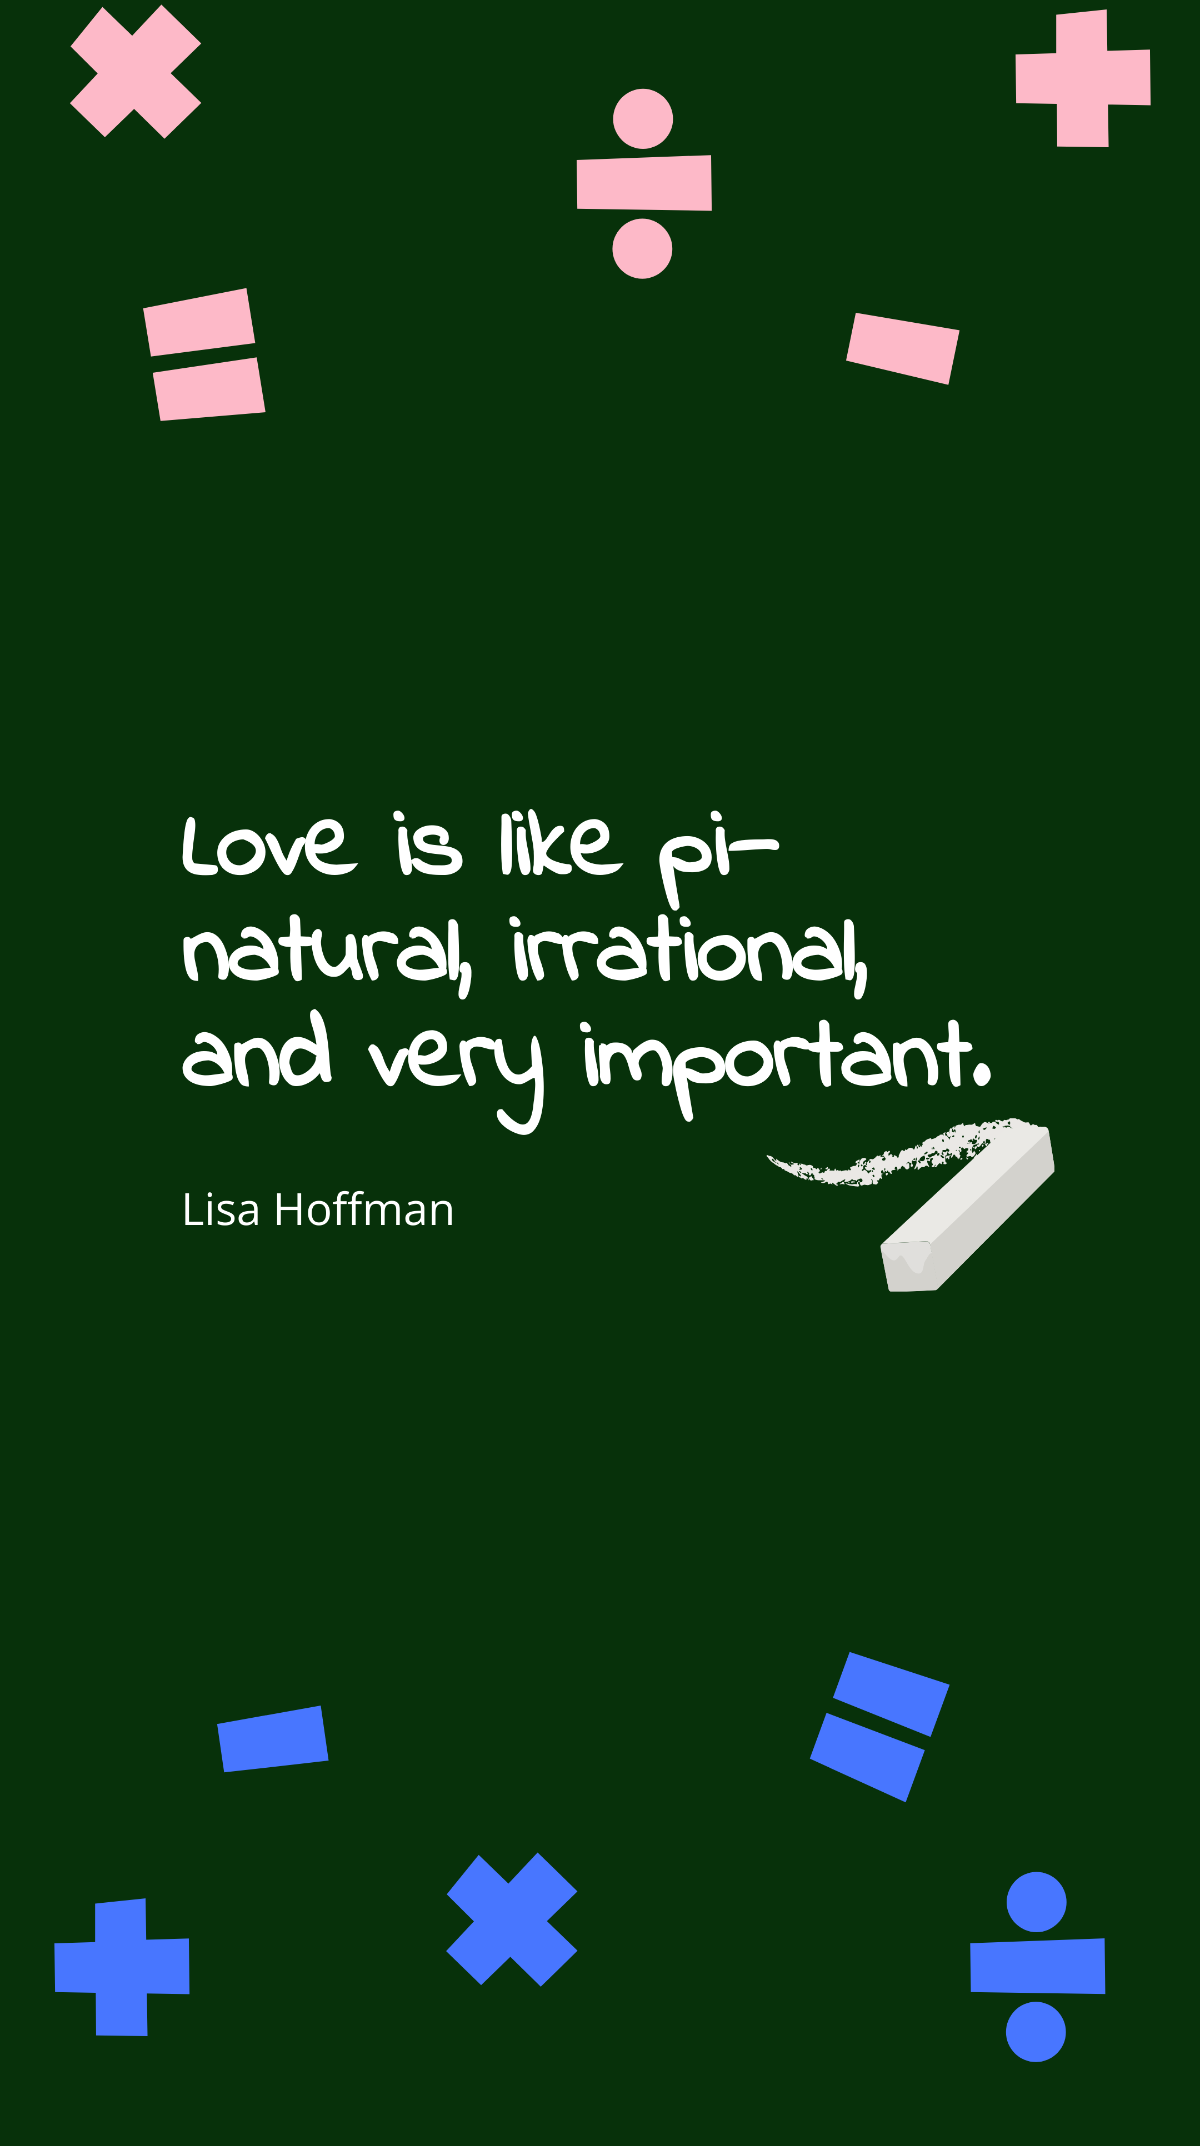 Lisa Hoffman - “Love is like pi – natural, irrational, and very important.” Template